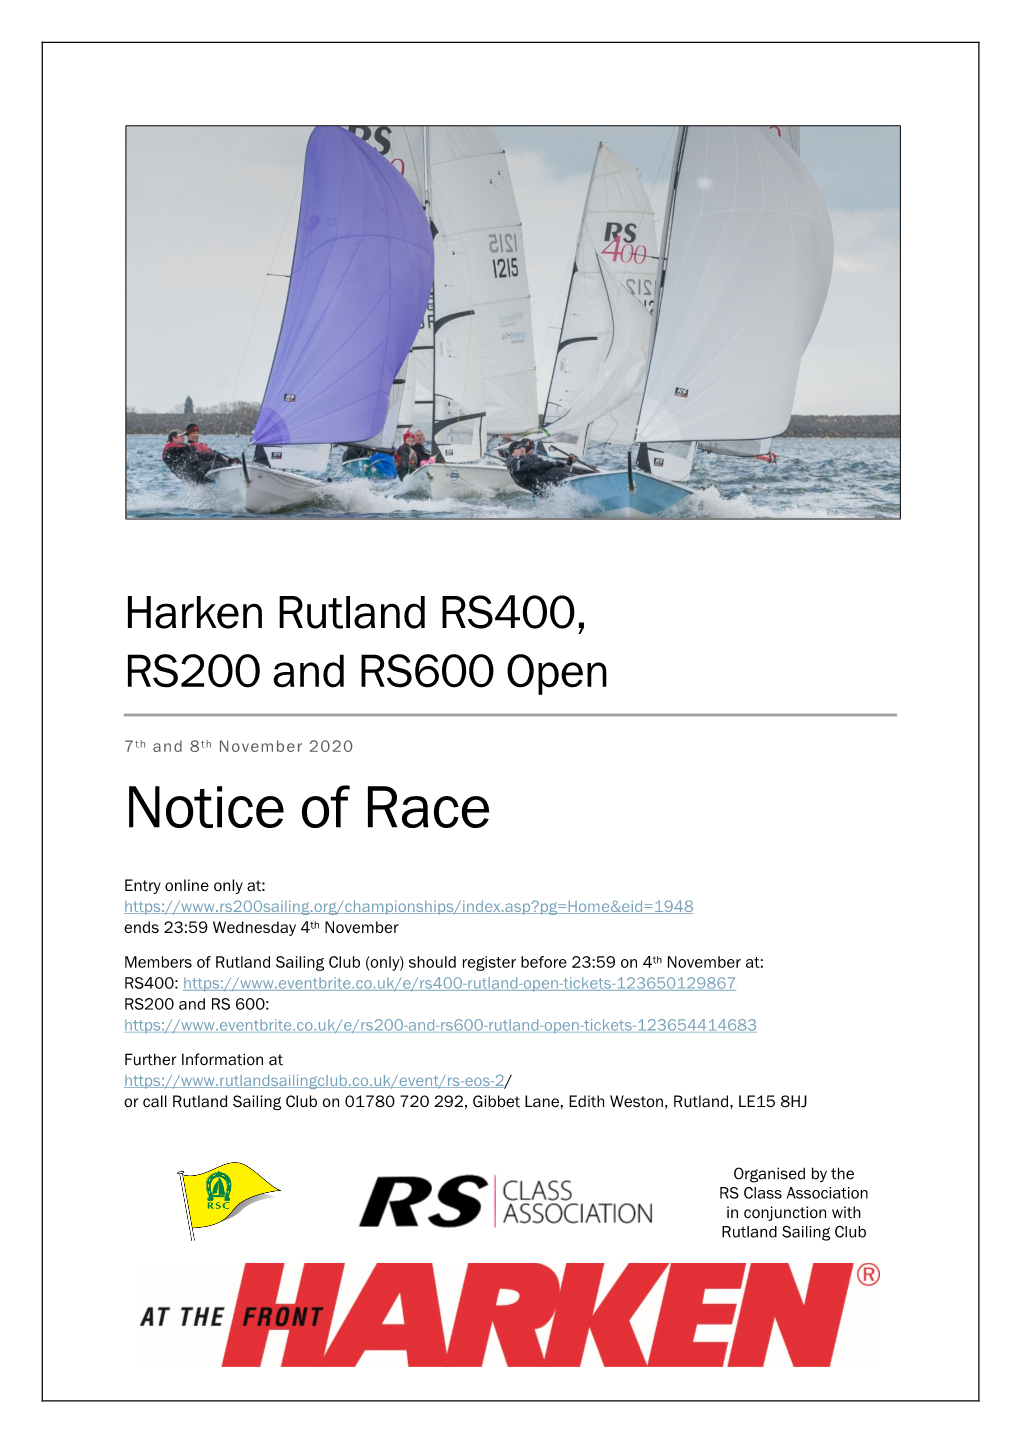 Harken Rutland RS400 RS200 and RS600 Open Notice of Race